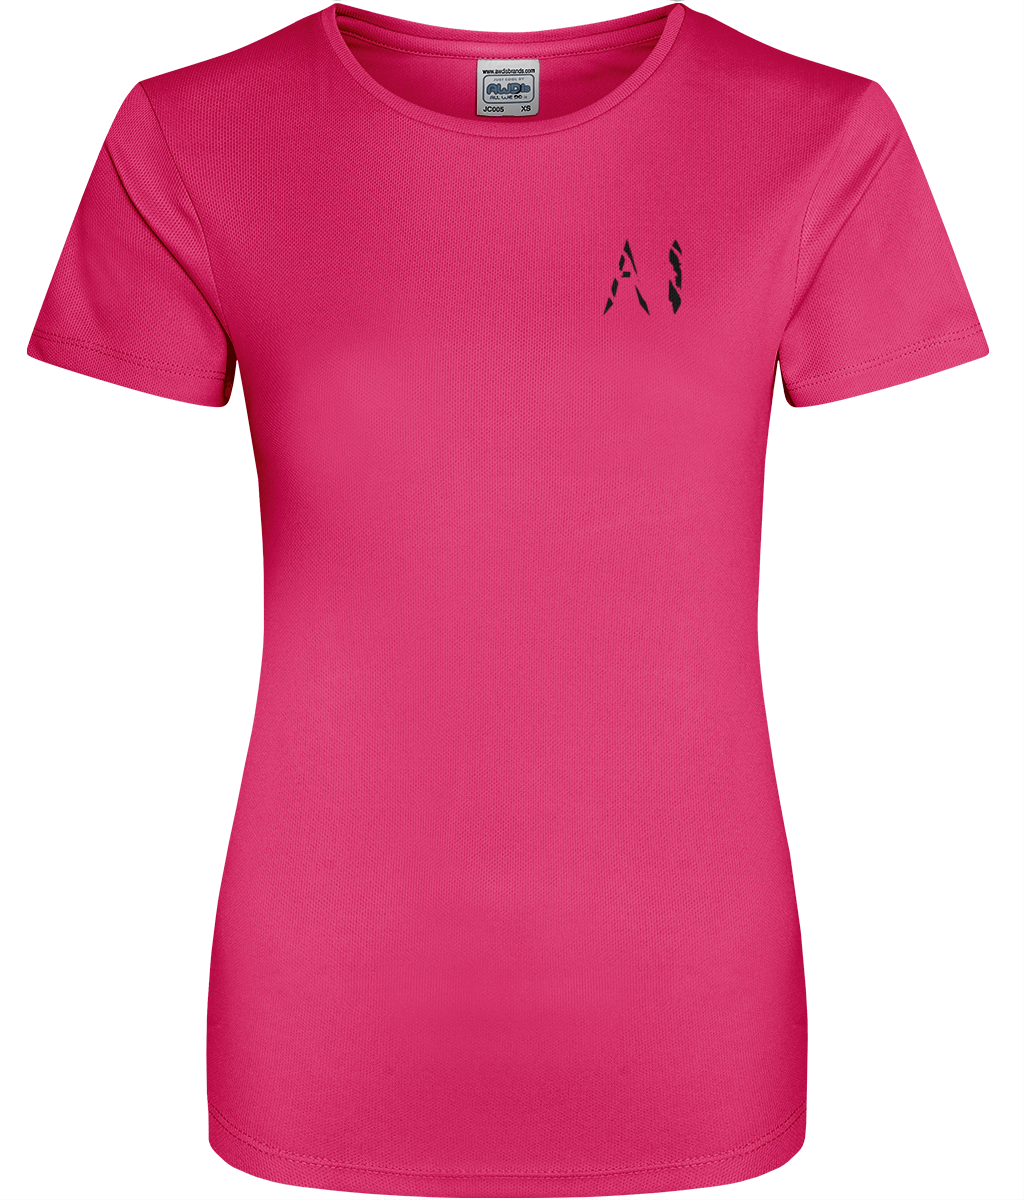 Womens pink magenta Athletic Sports Shirt with black AI logo on left breast